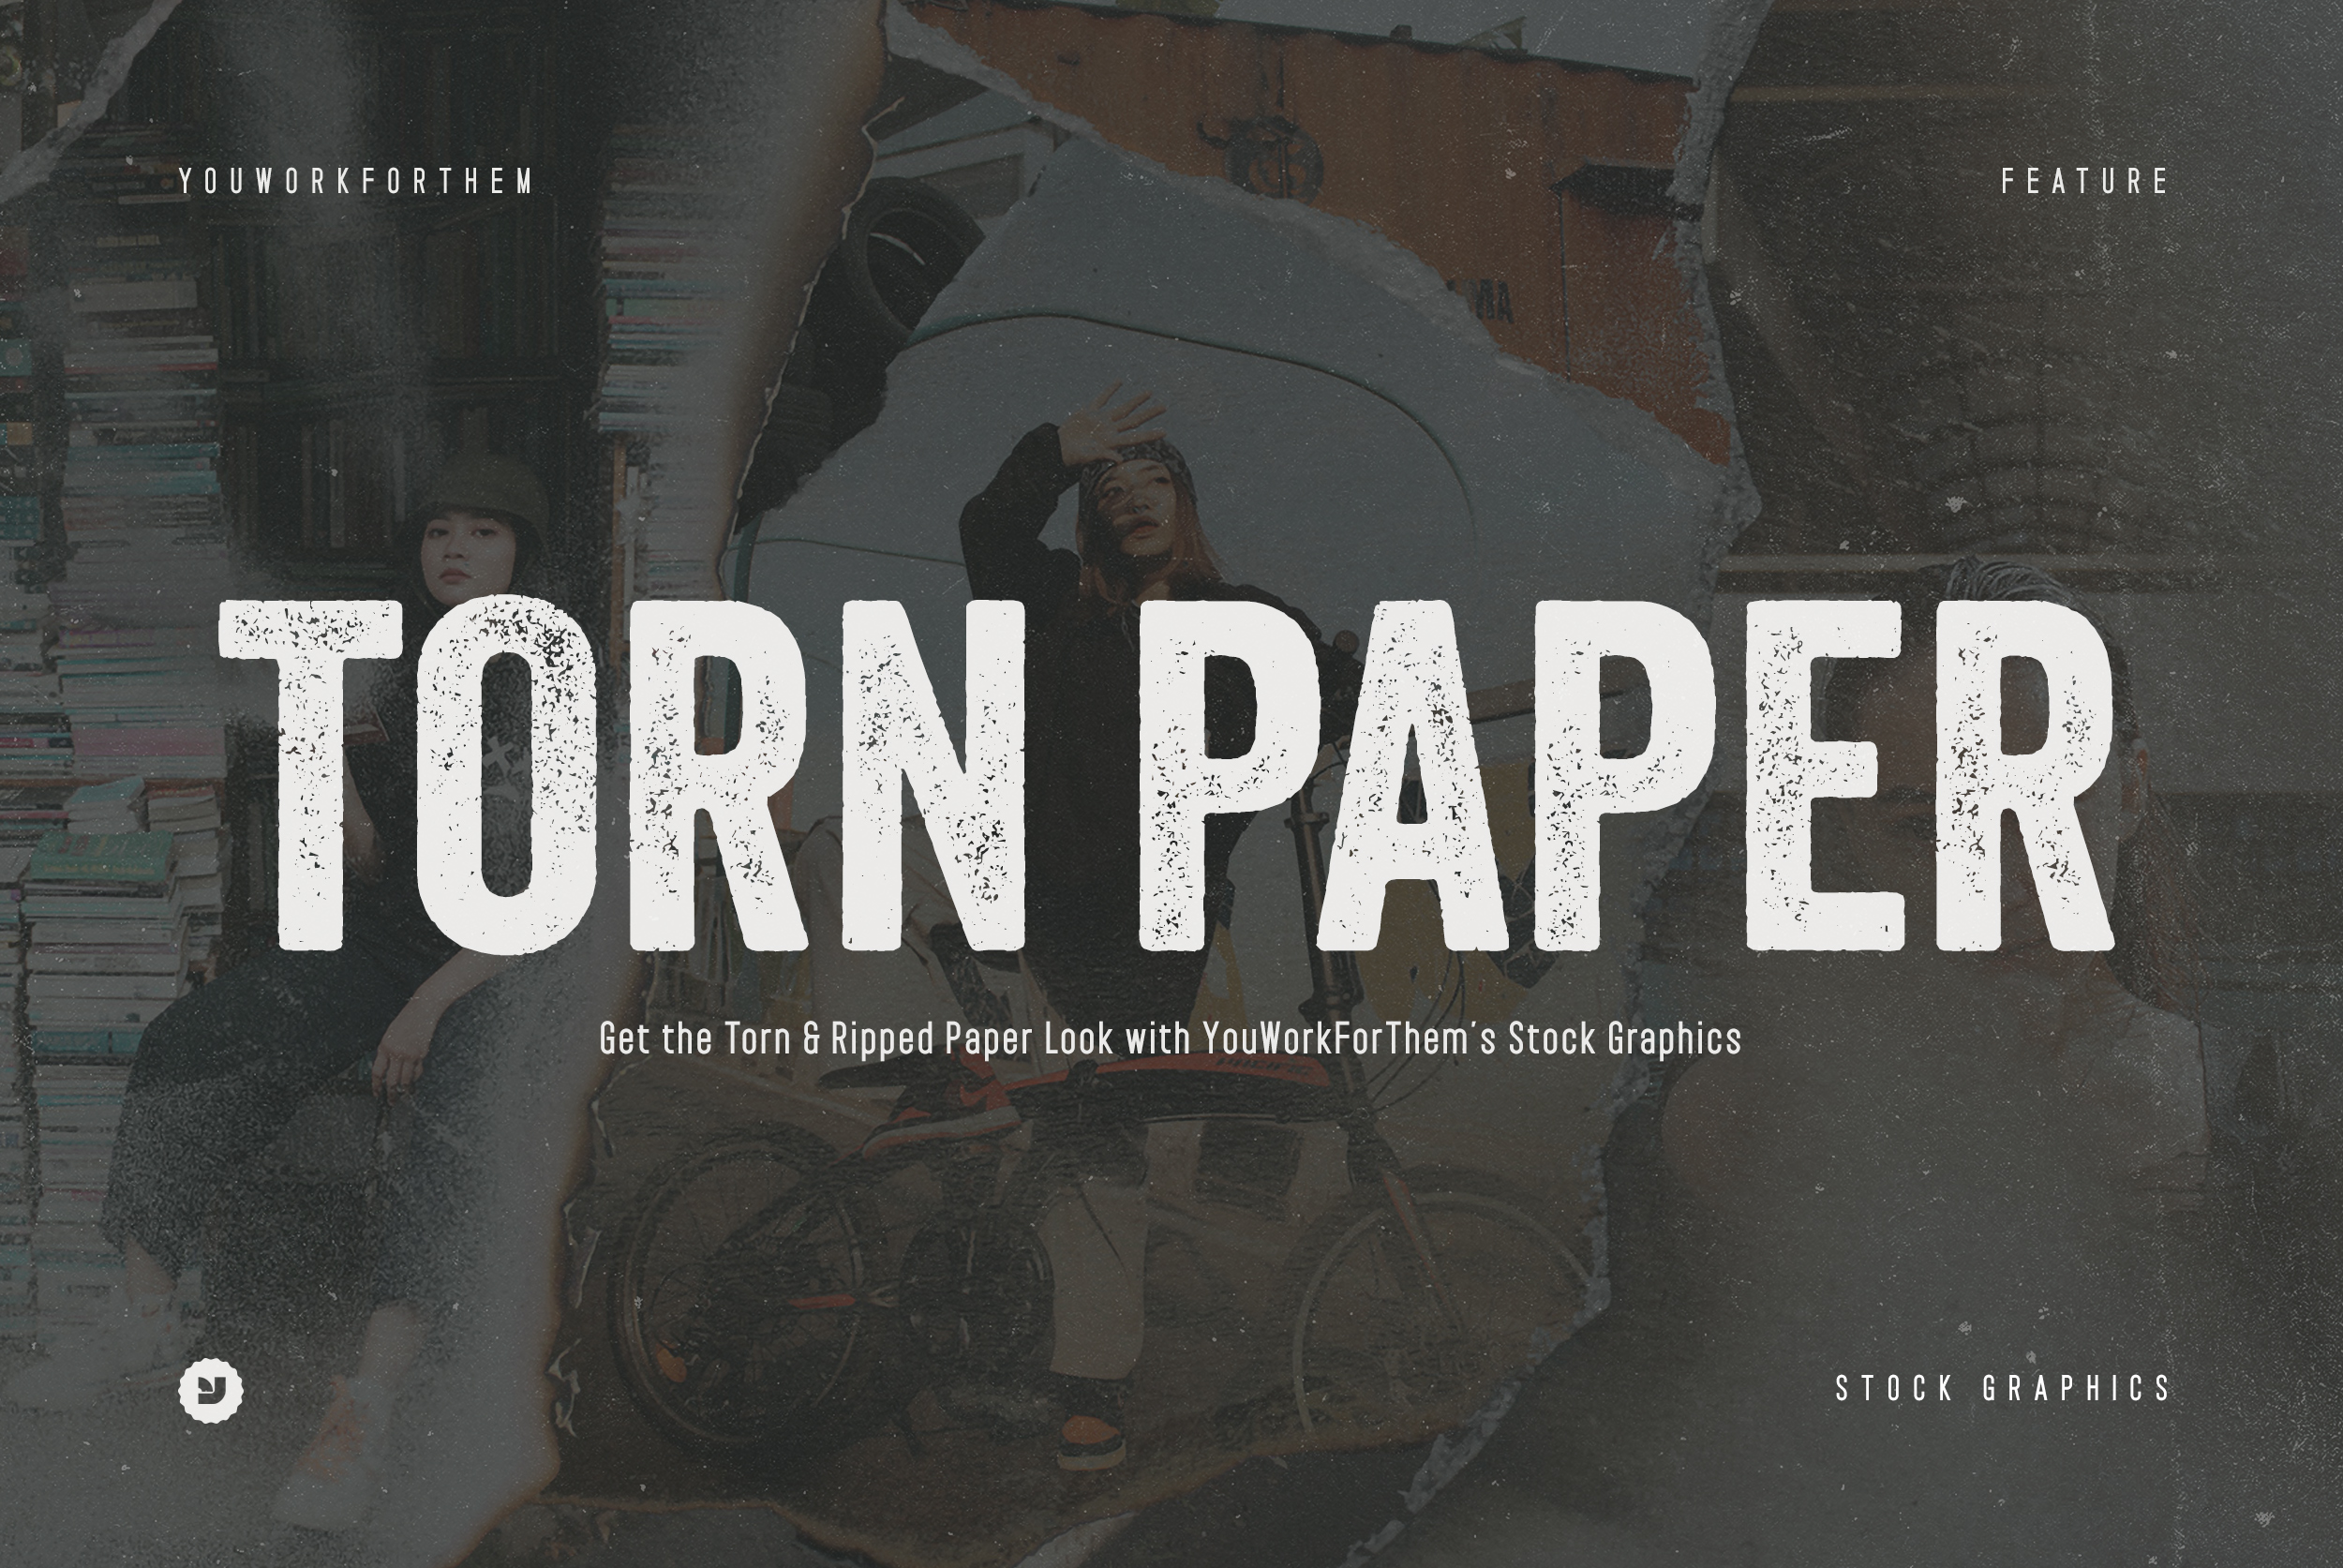 Get the Torn & Ripped Paper Look with Photoshop Textures